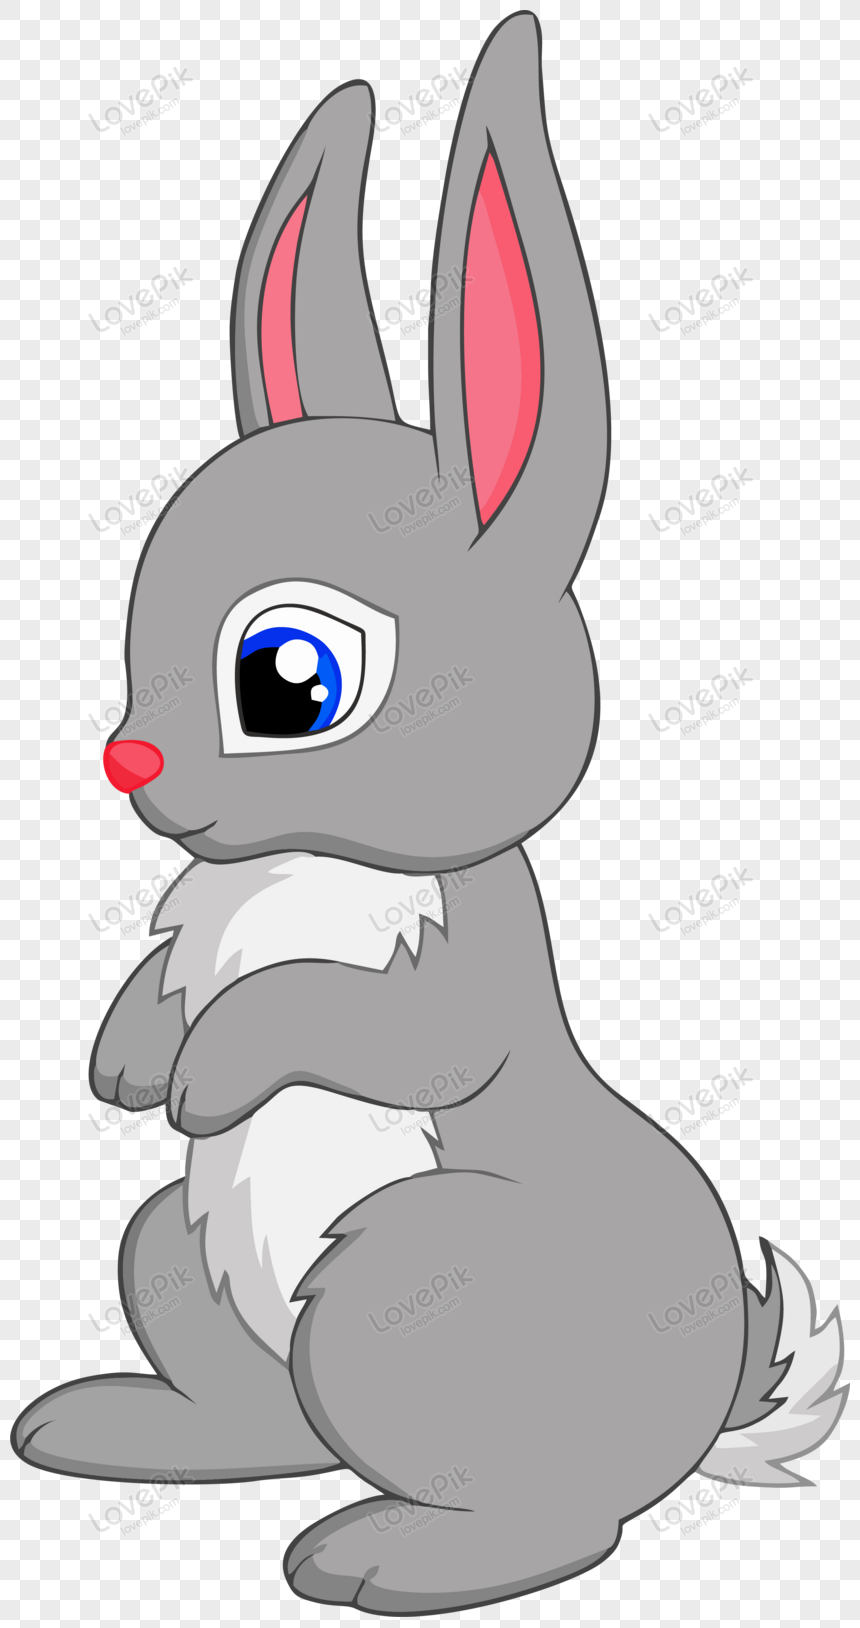 Animated Cute Bunny Illustration Vector PNG Hd Transparent Image And  Clipart Image For Free Download - Lovepik | 450063514